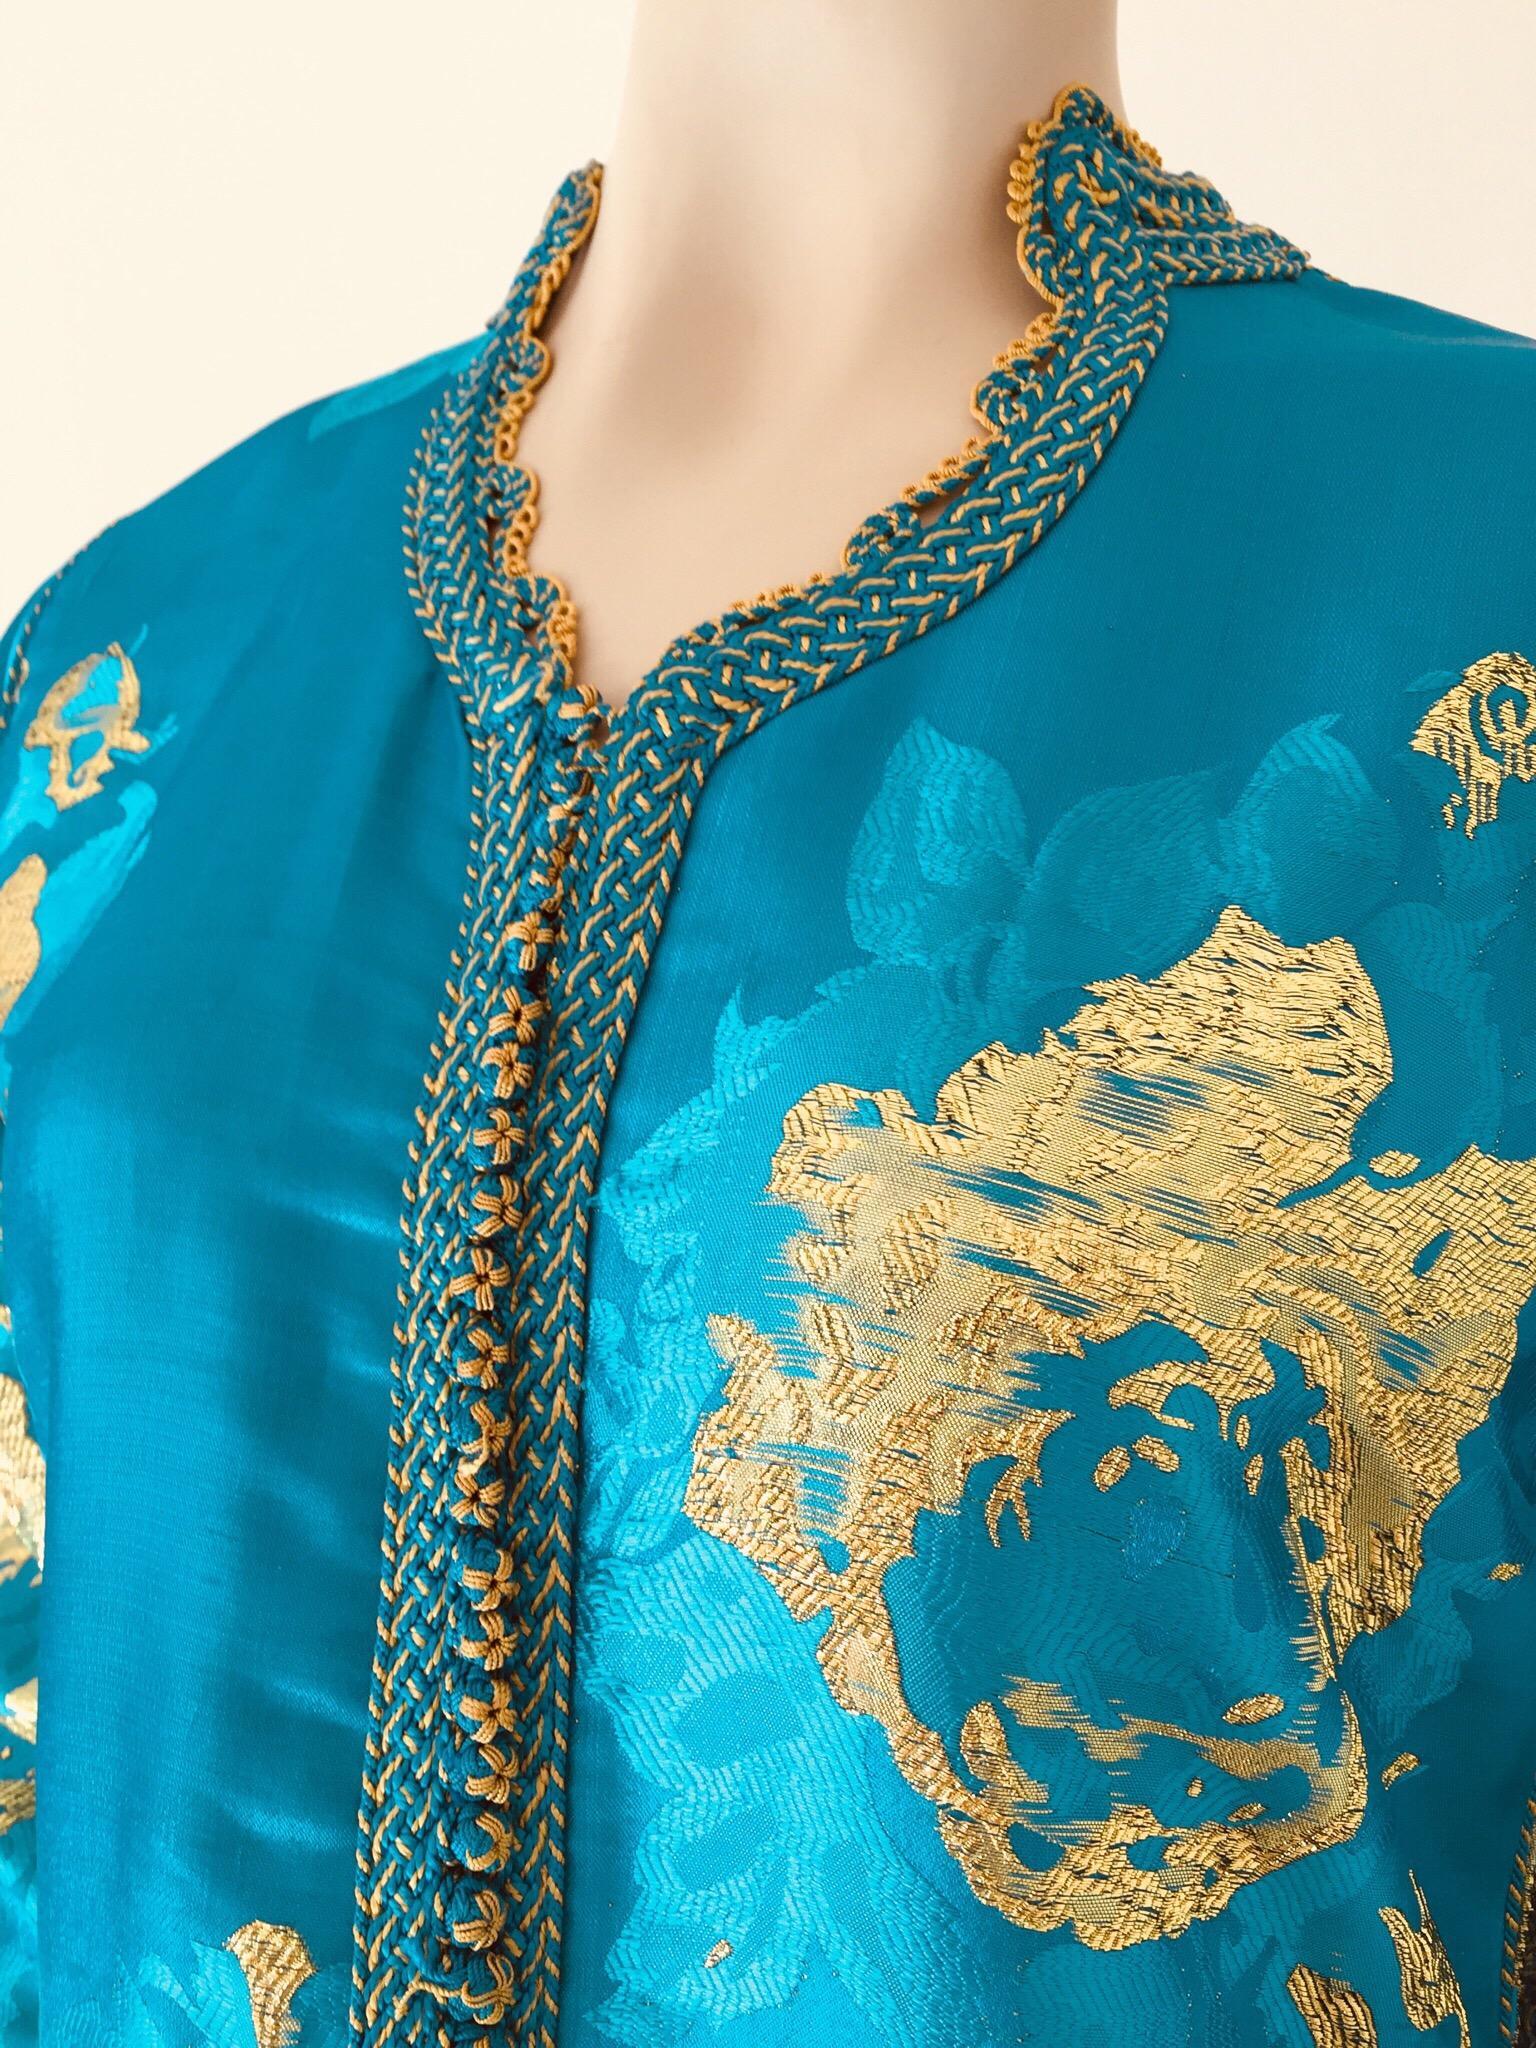 Moroccan Kaftan in Turquoise and Gold Floral Brocade Metallic Lame 3